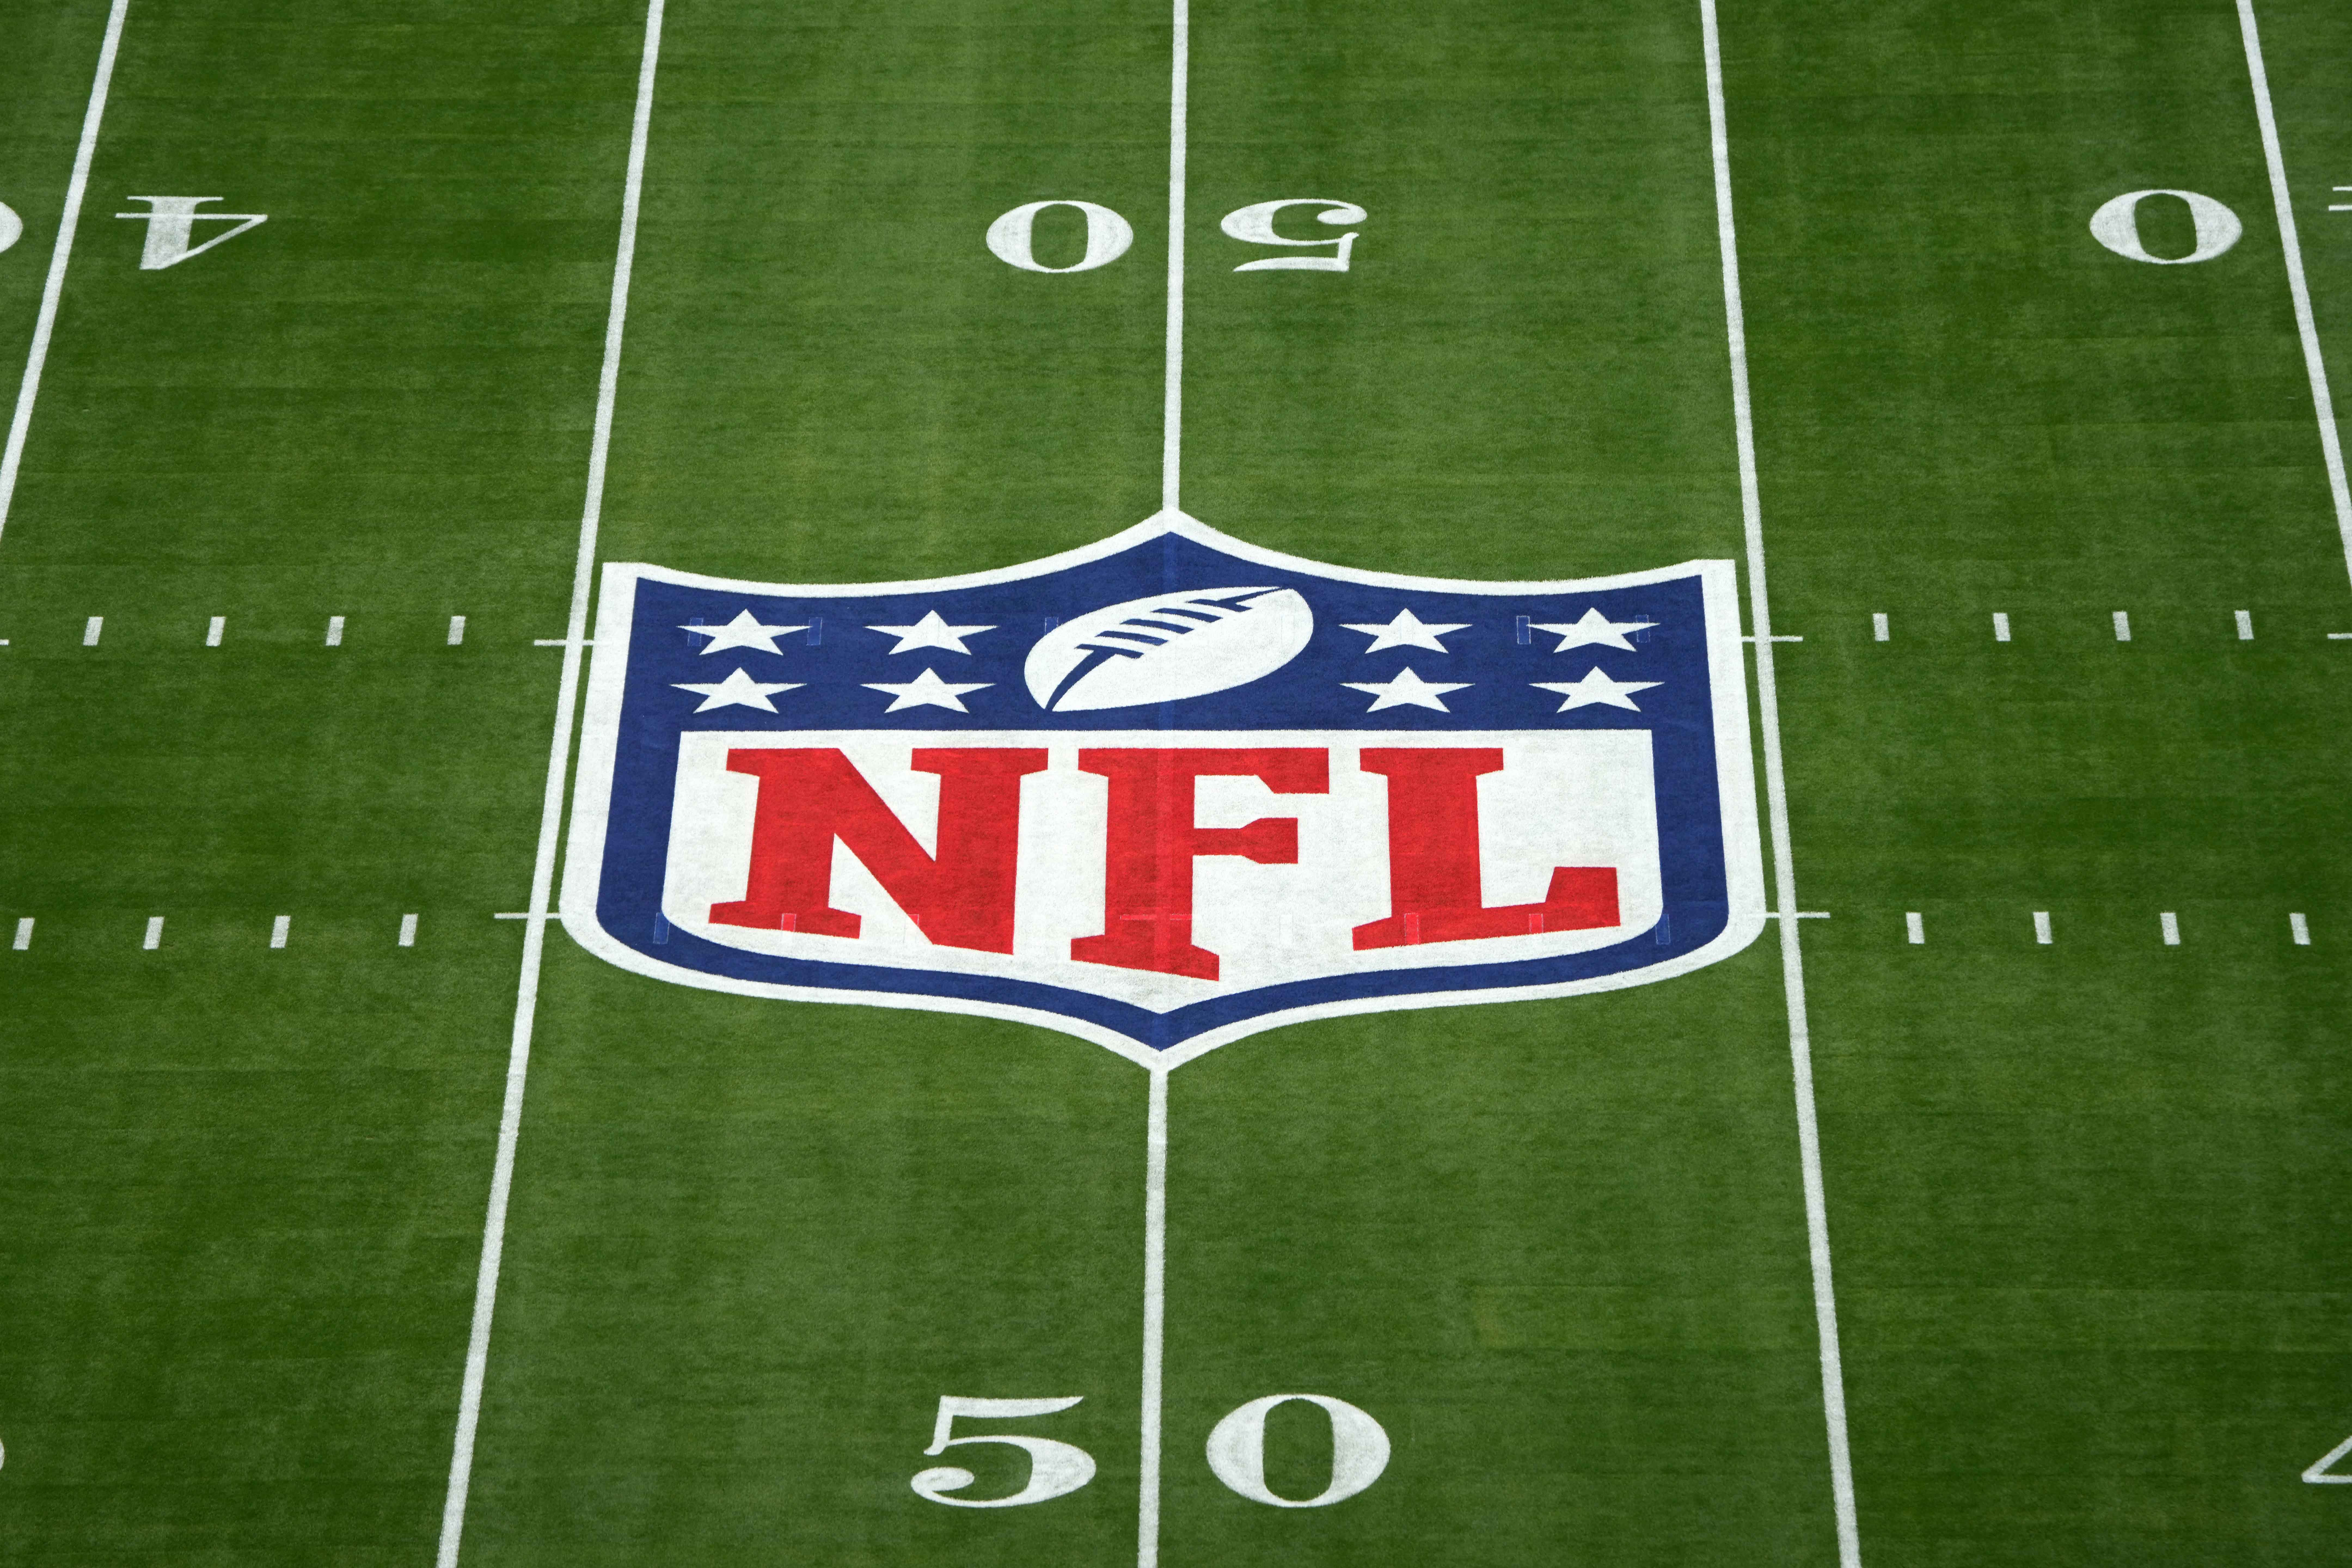 Five NFL players were suspended in April for gambling violations.